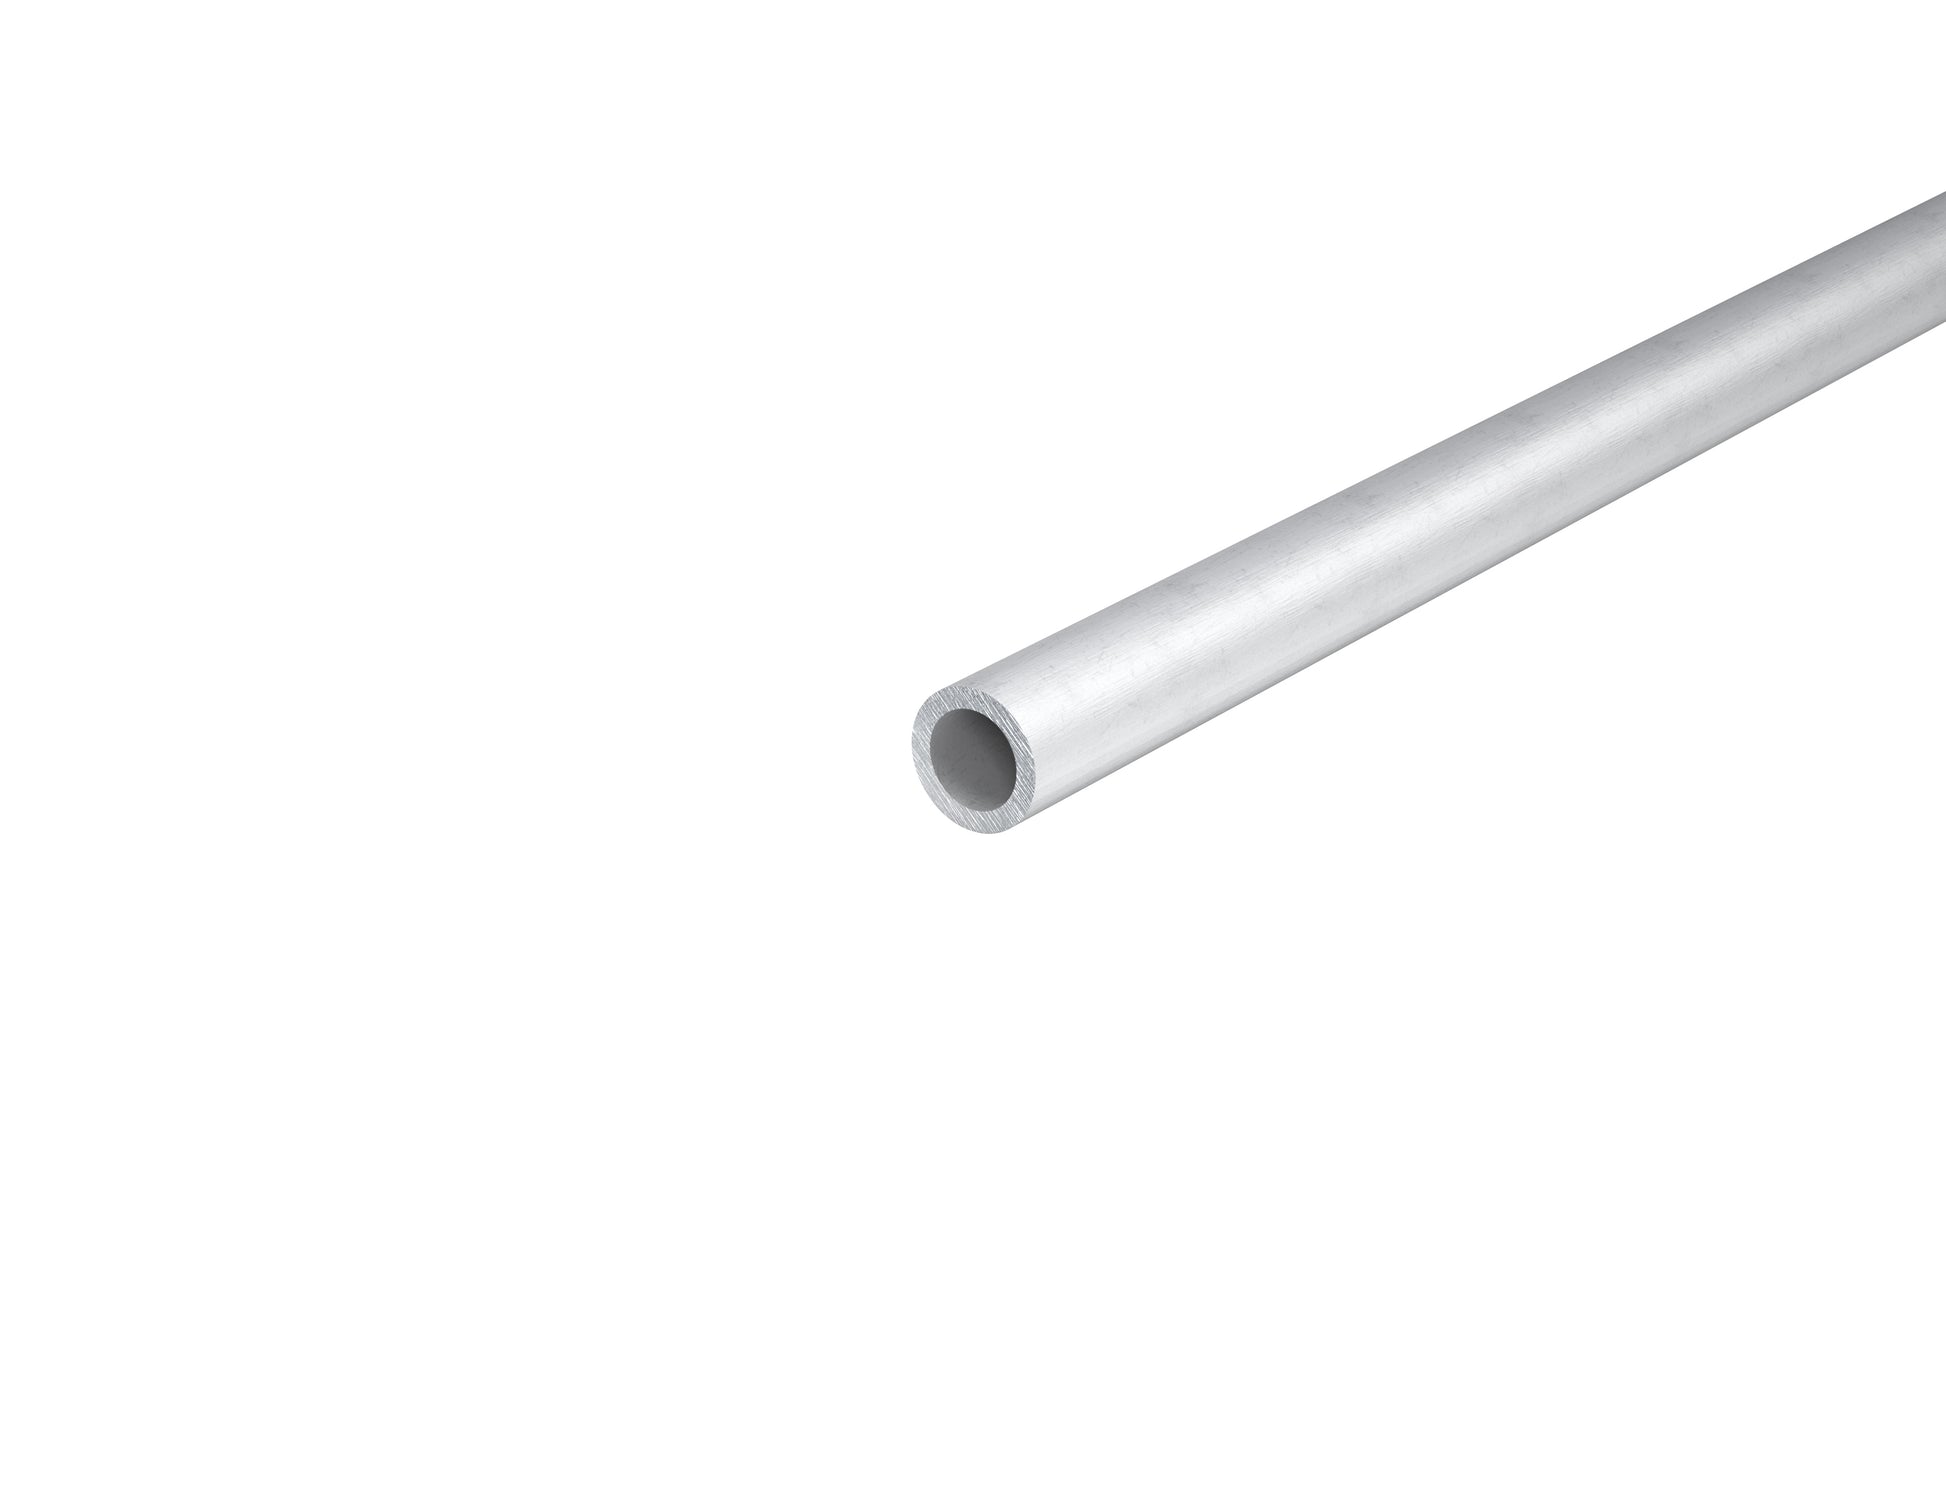 0.897" OD x 0.136" Wall Extruded Round Aluminum Tube 6063-T6 Approximately 29/32" OD x 1/8" Wall